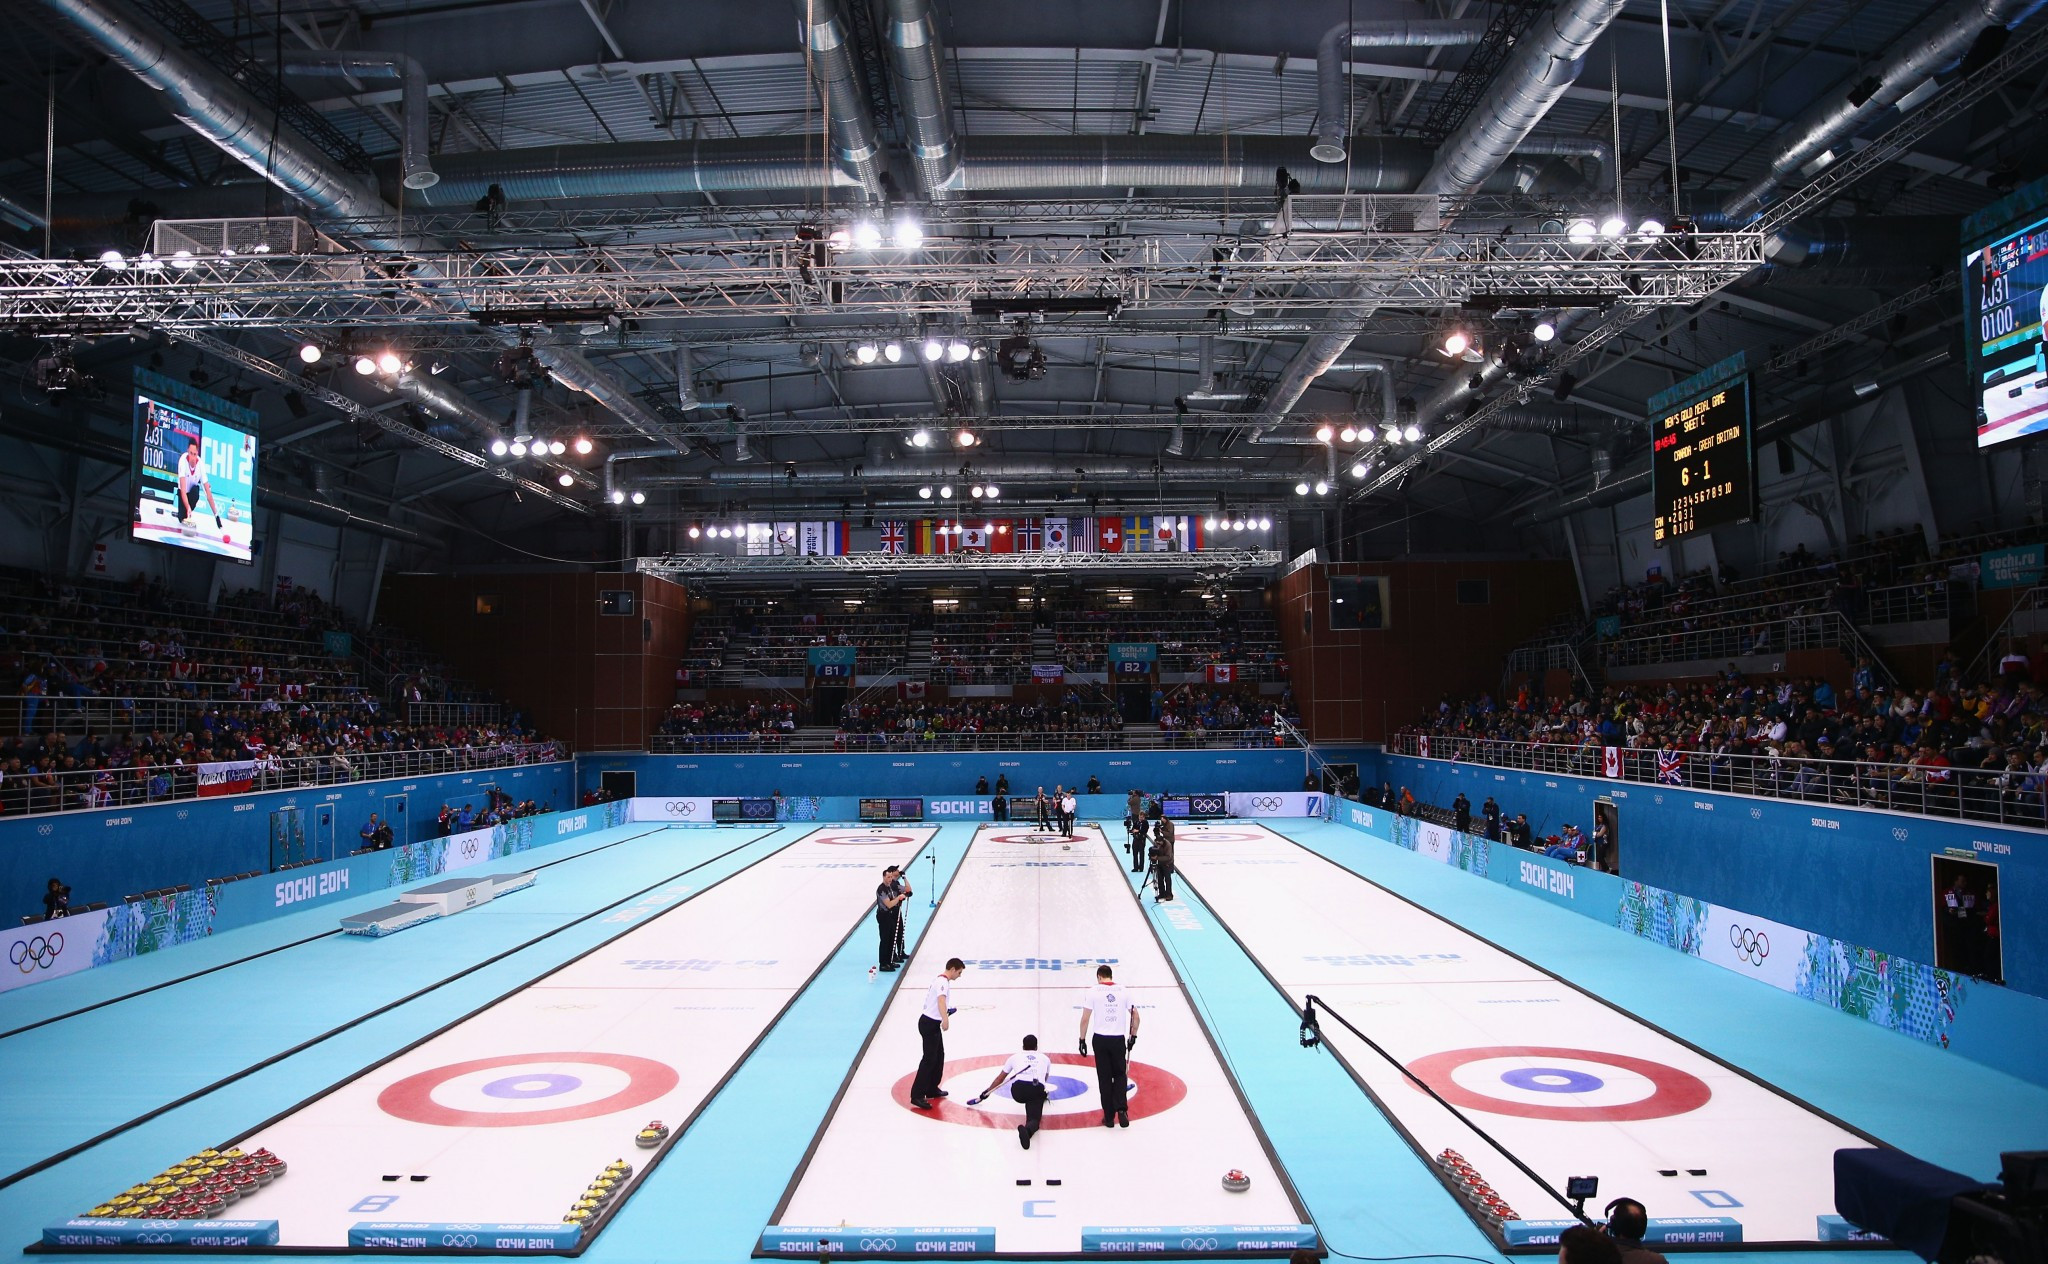 USA Curling and Jet Ice renew sponsorship deal